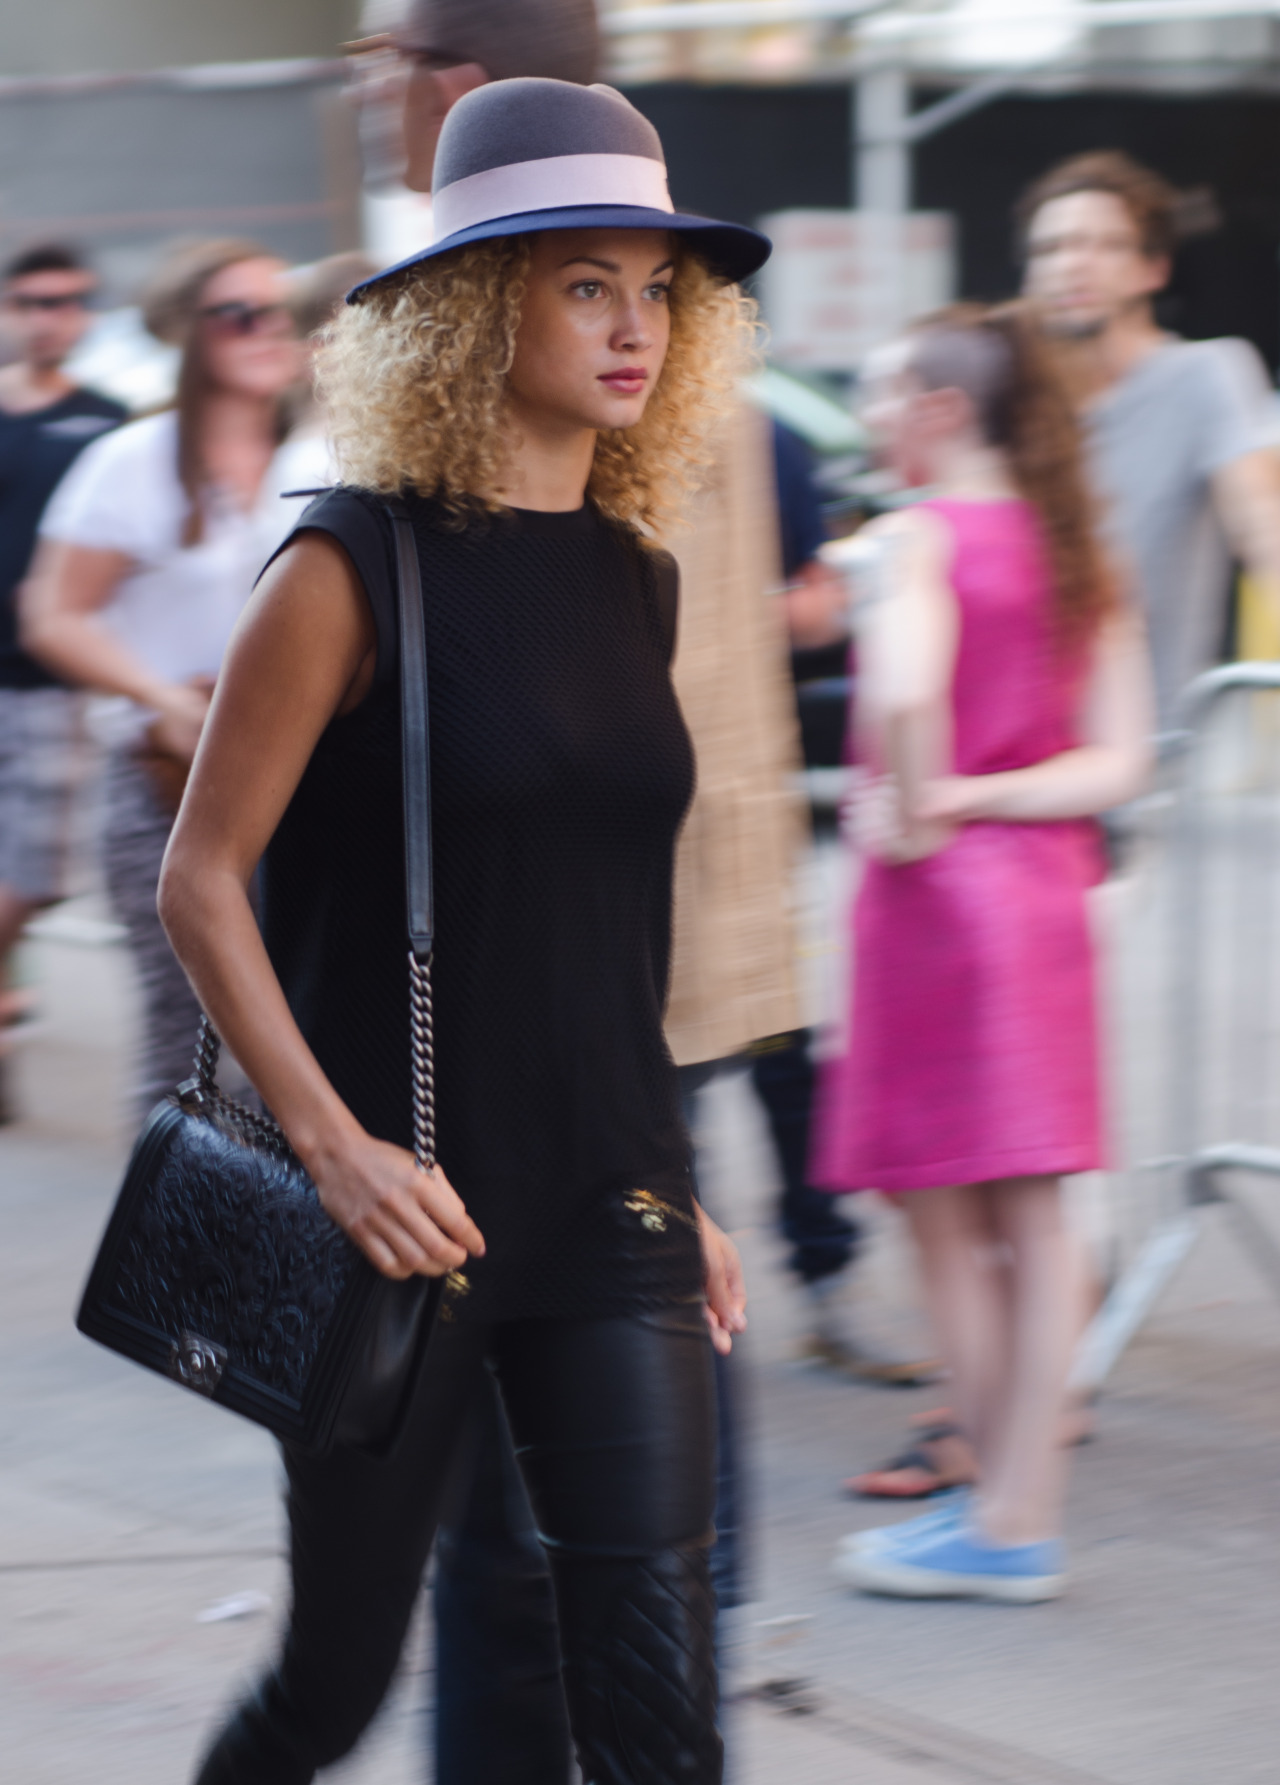 All Black at NYFW
Streetstyle Fashion at Mercedes-Benz Fashion Week
Photo by Lordale Benosa